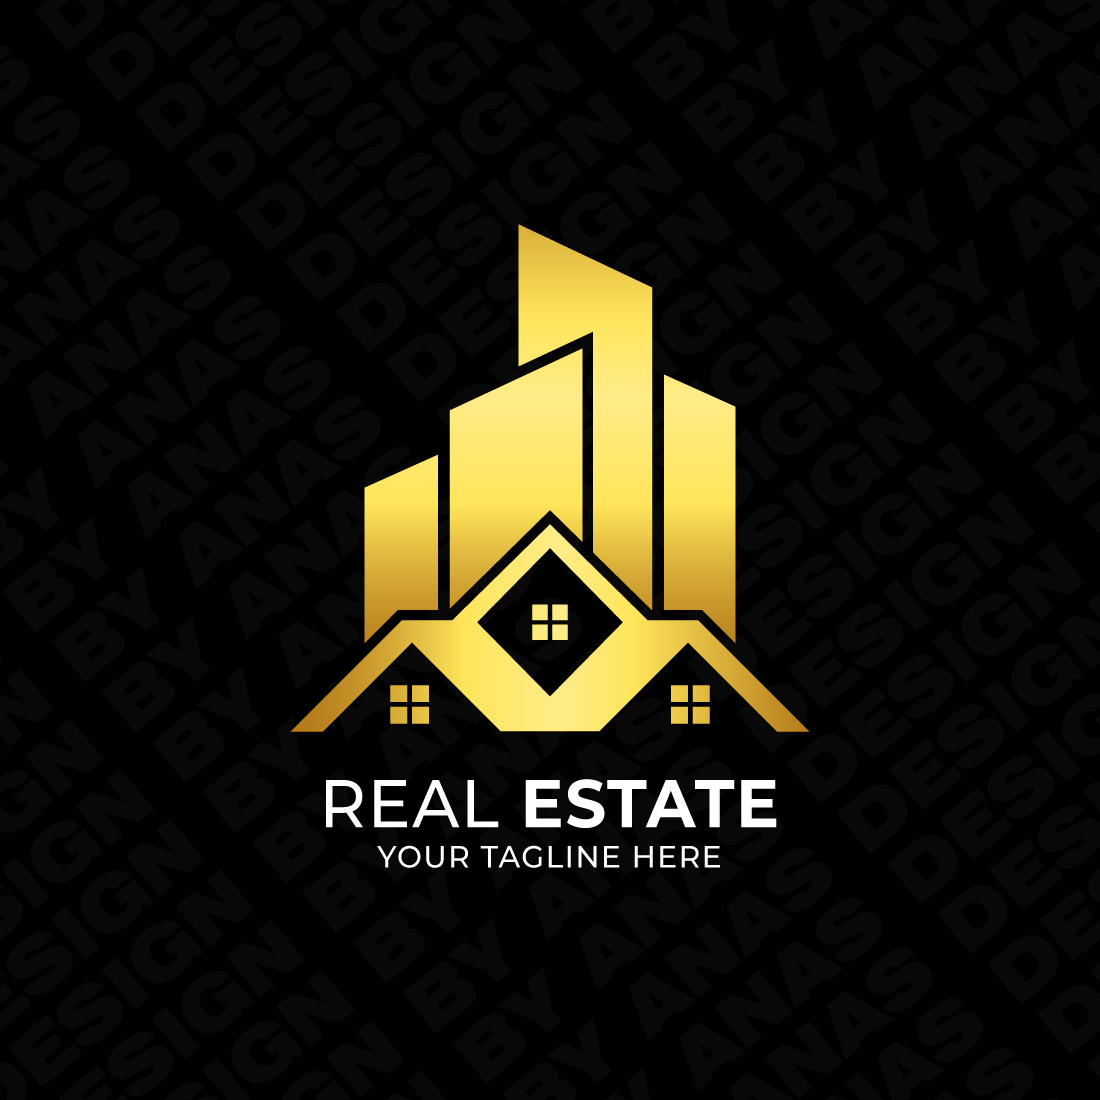 Real Estate Logo Design, Building Logo Template – ONLY $9 preview image.